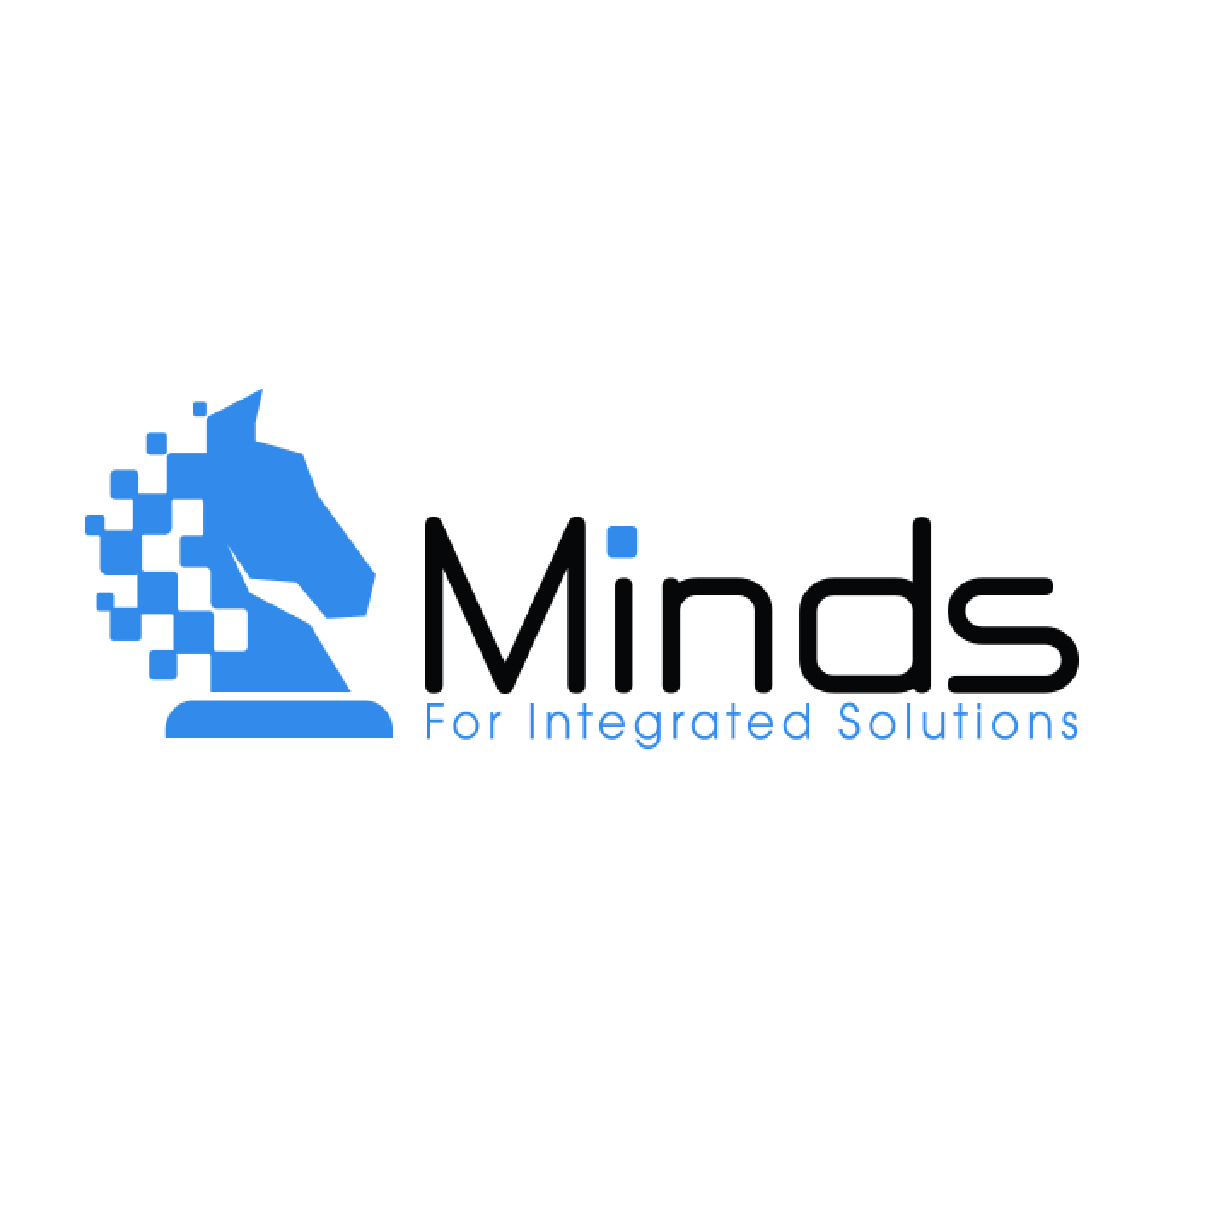 Minds for integrated solution